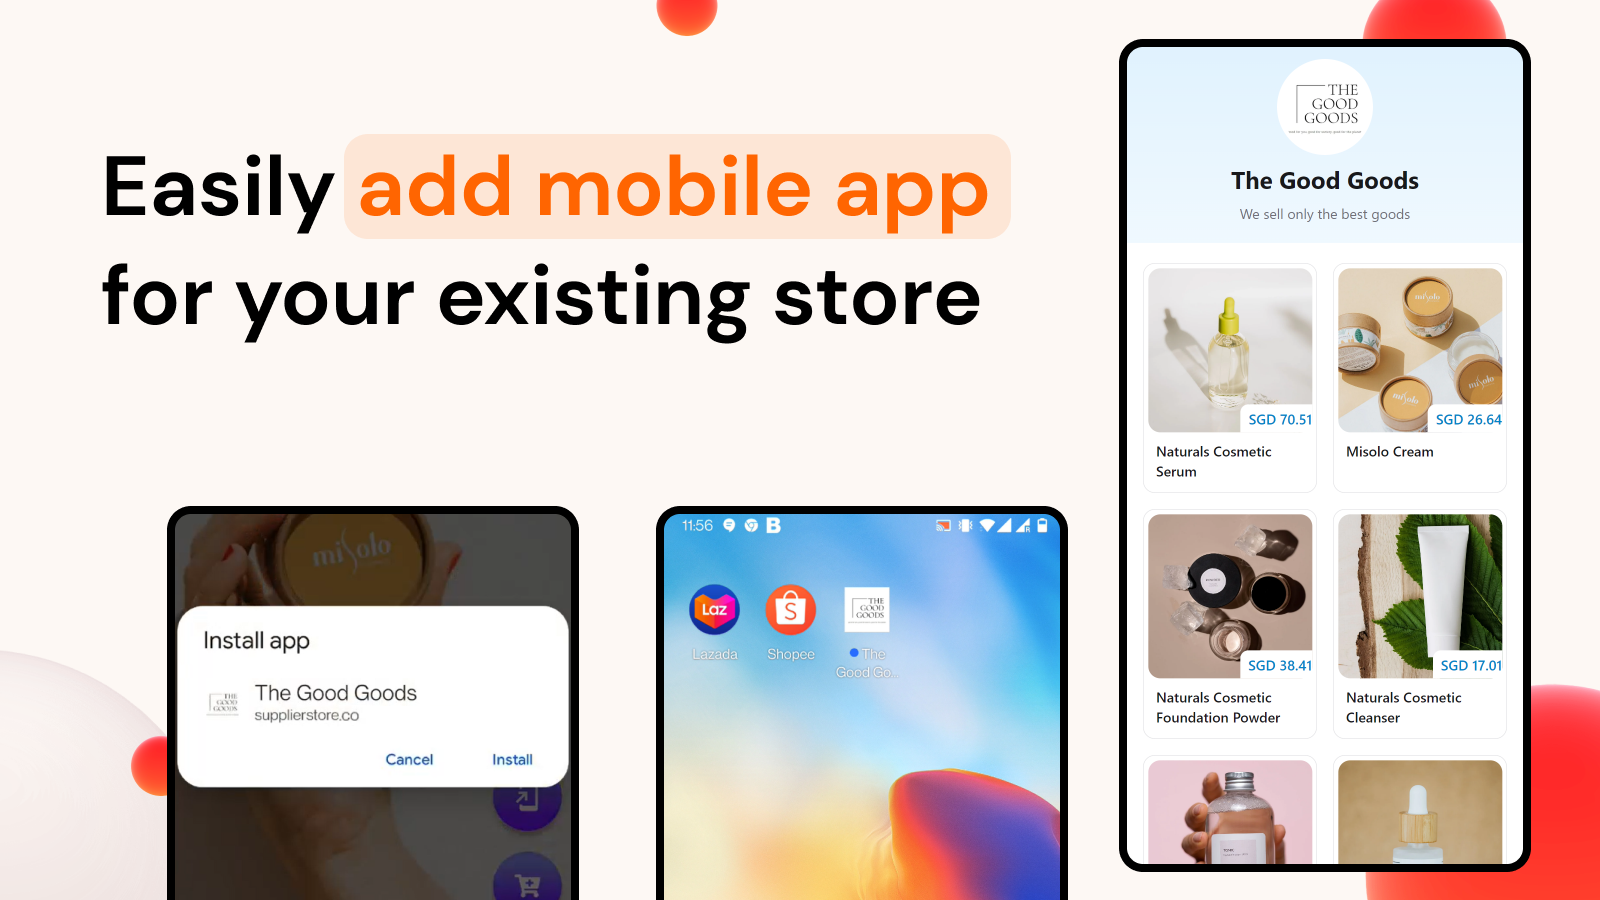 Easily add mobile app for your existing store